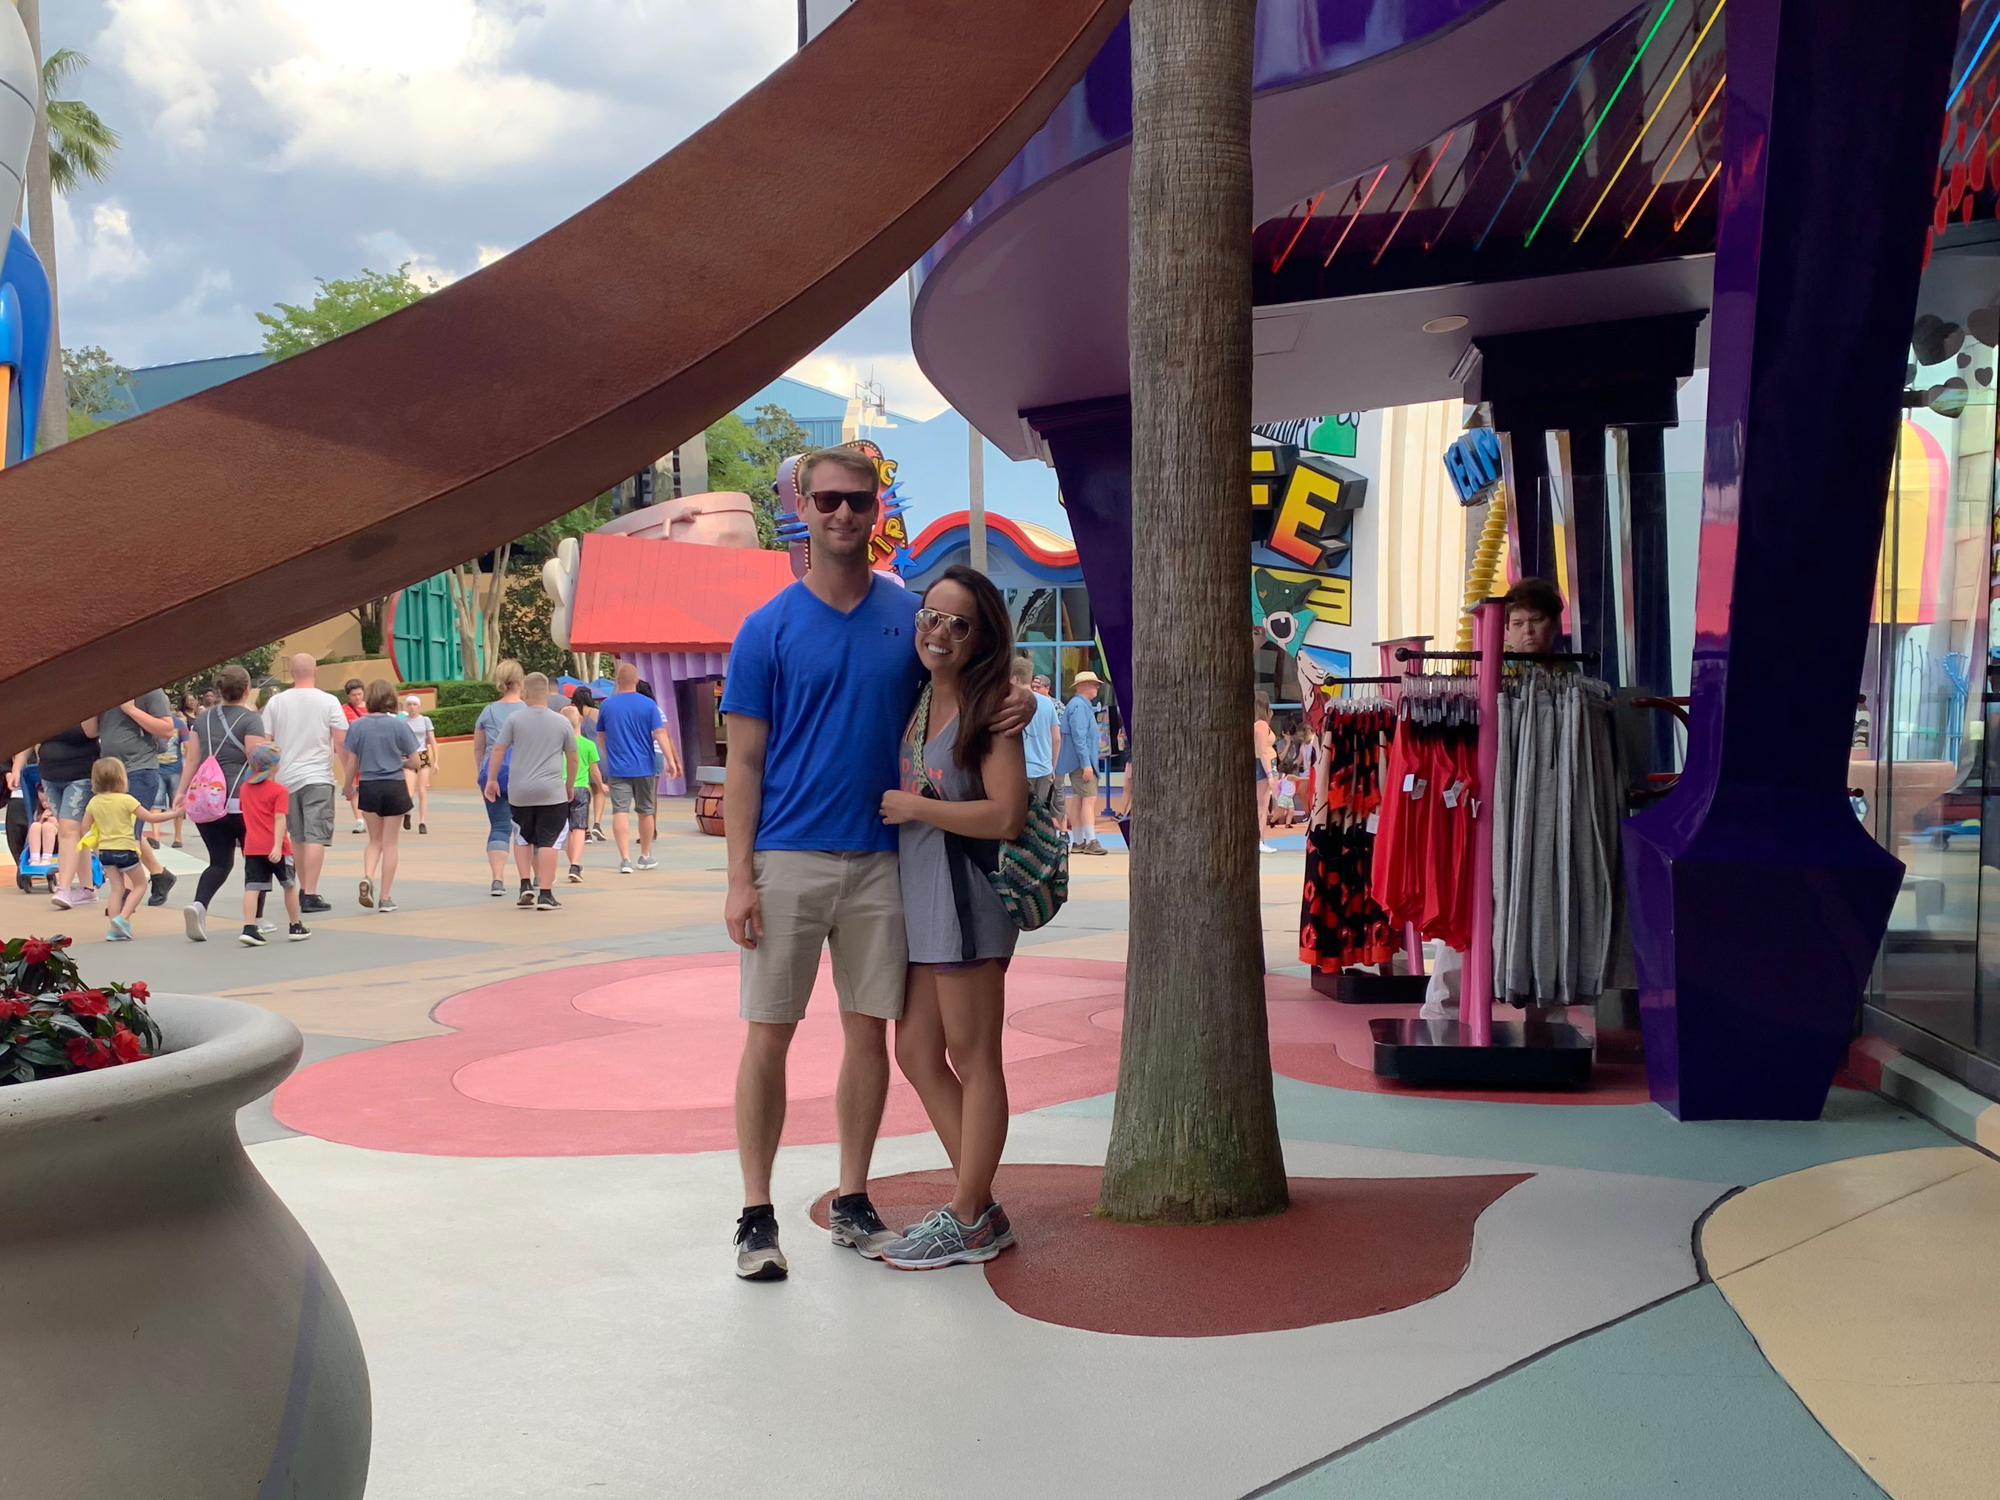 Our first trip to Disney and Universal Studios in Florida, March 2019.